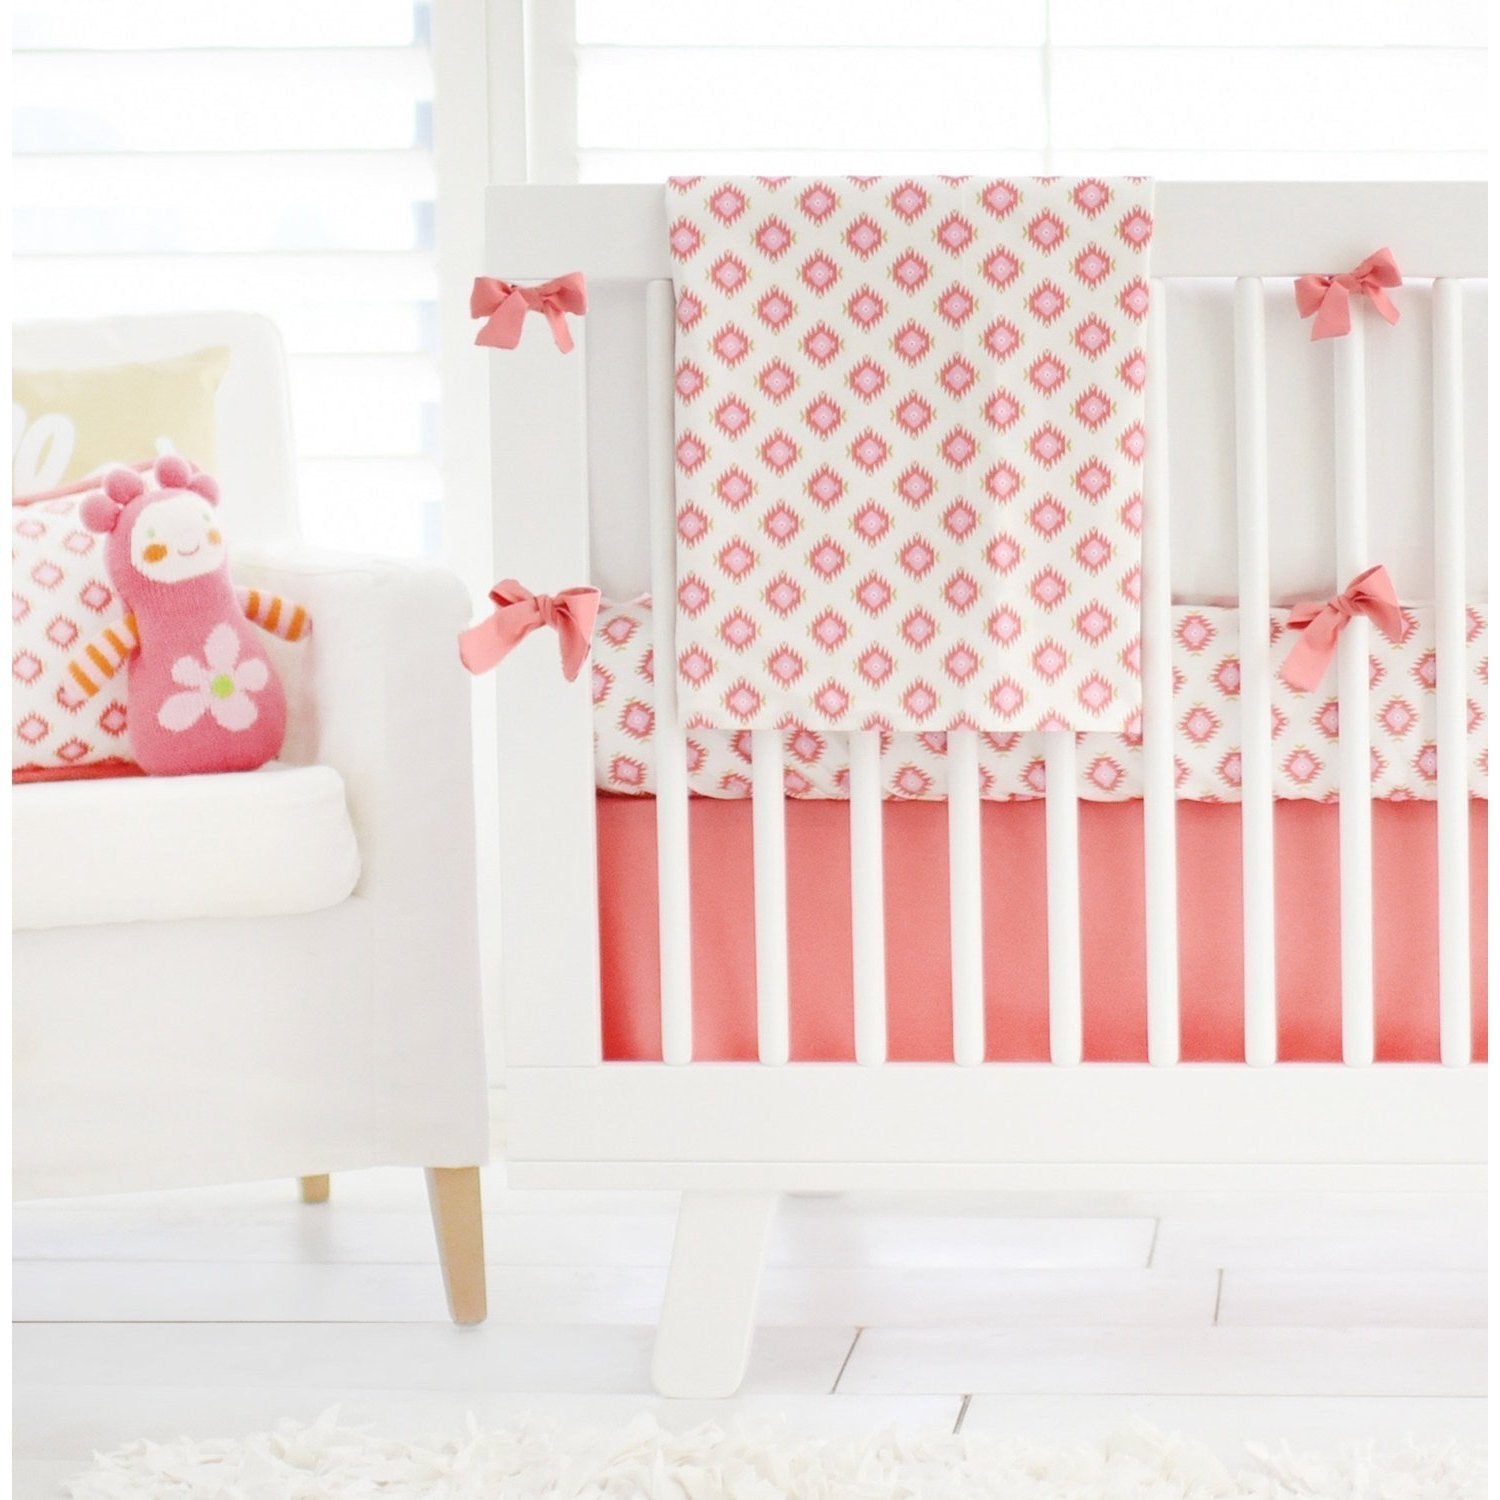 pink and gold baby crib bedding